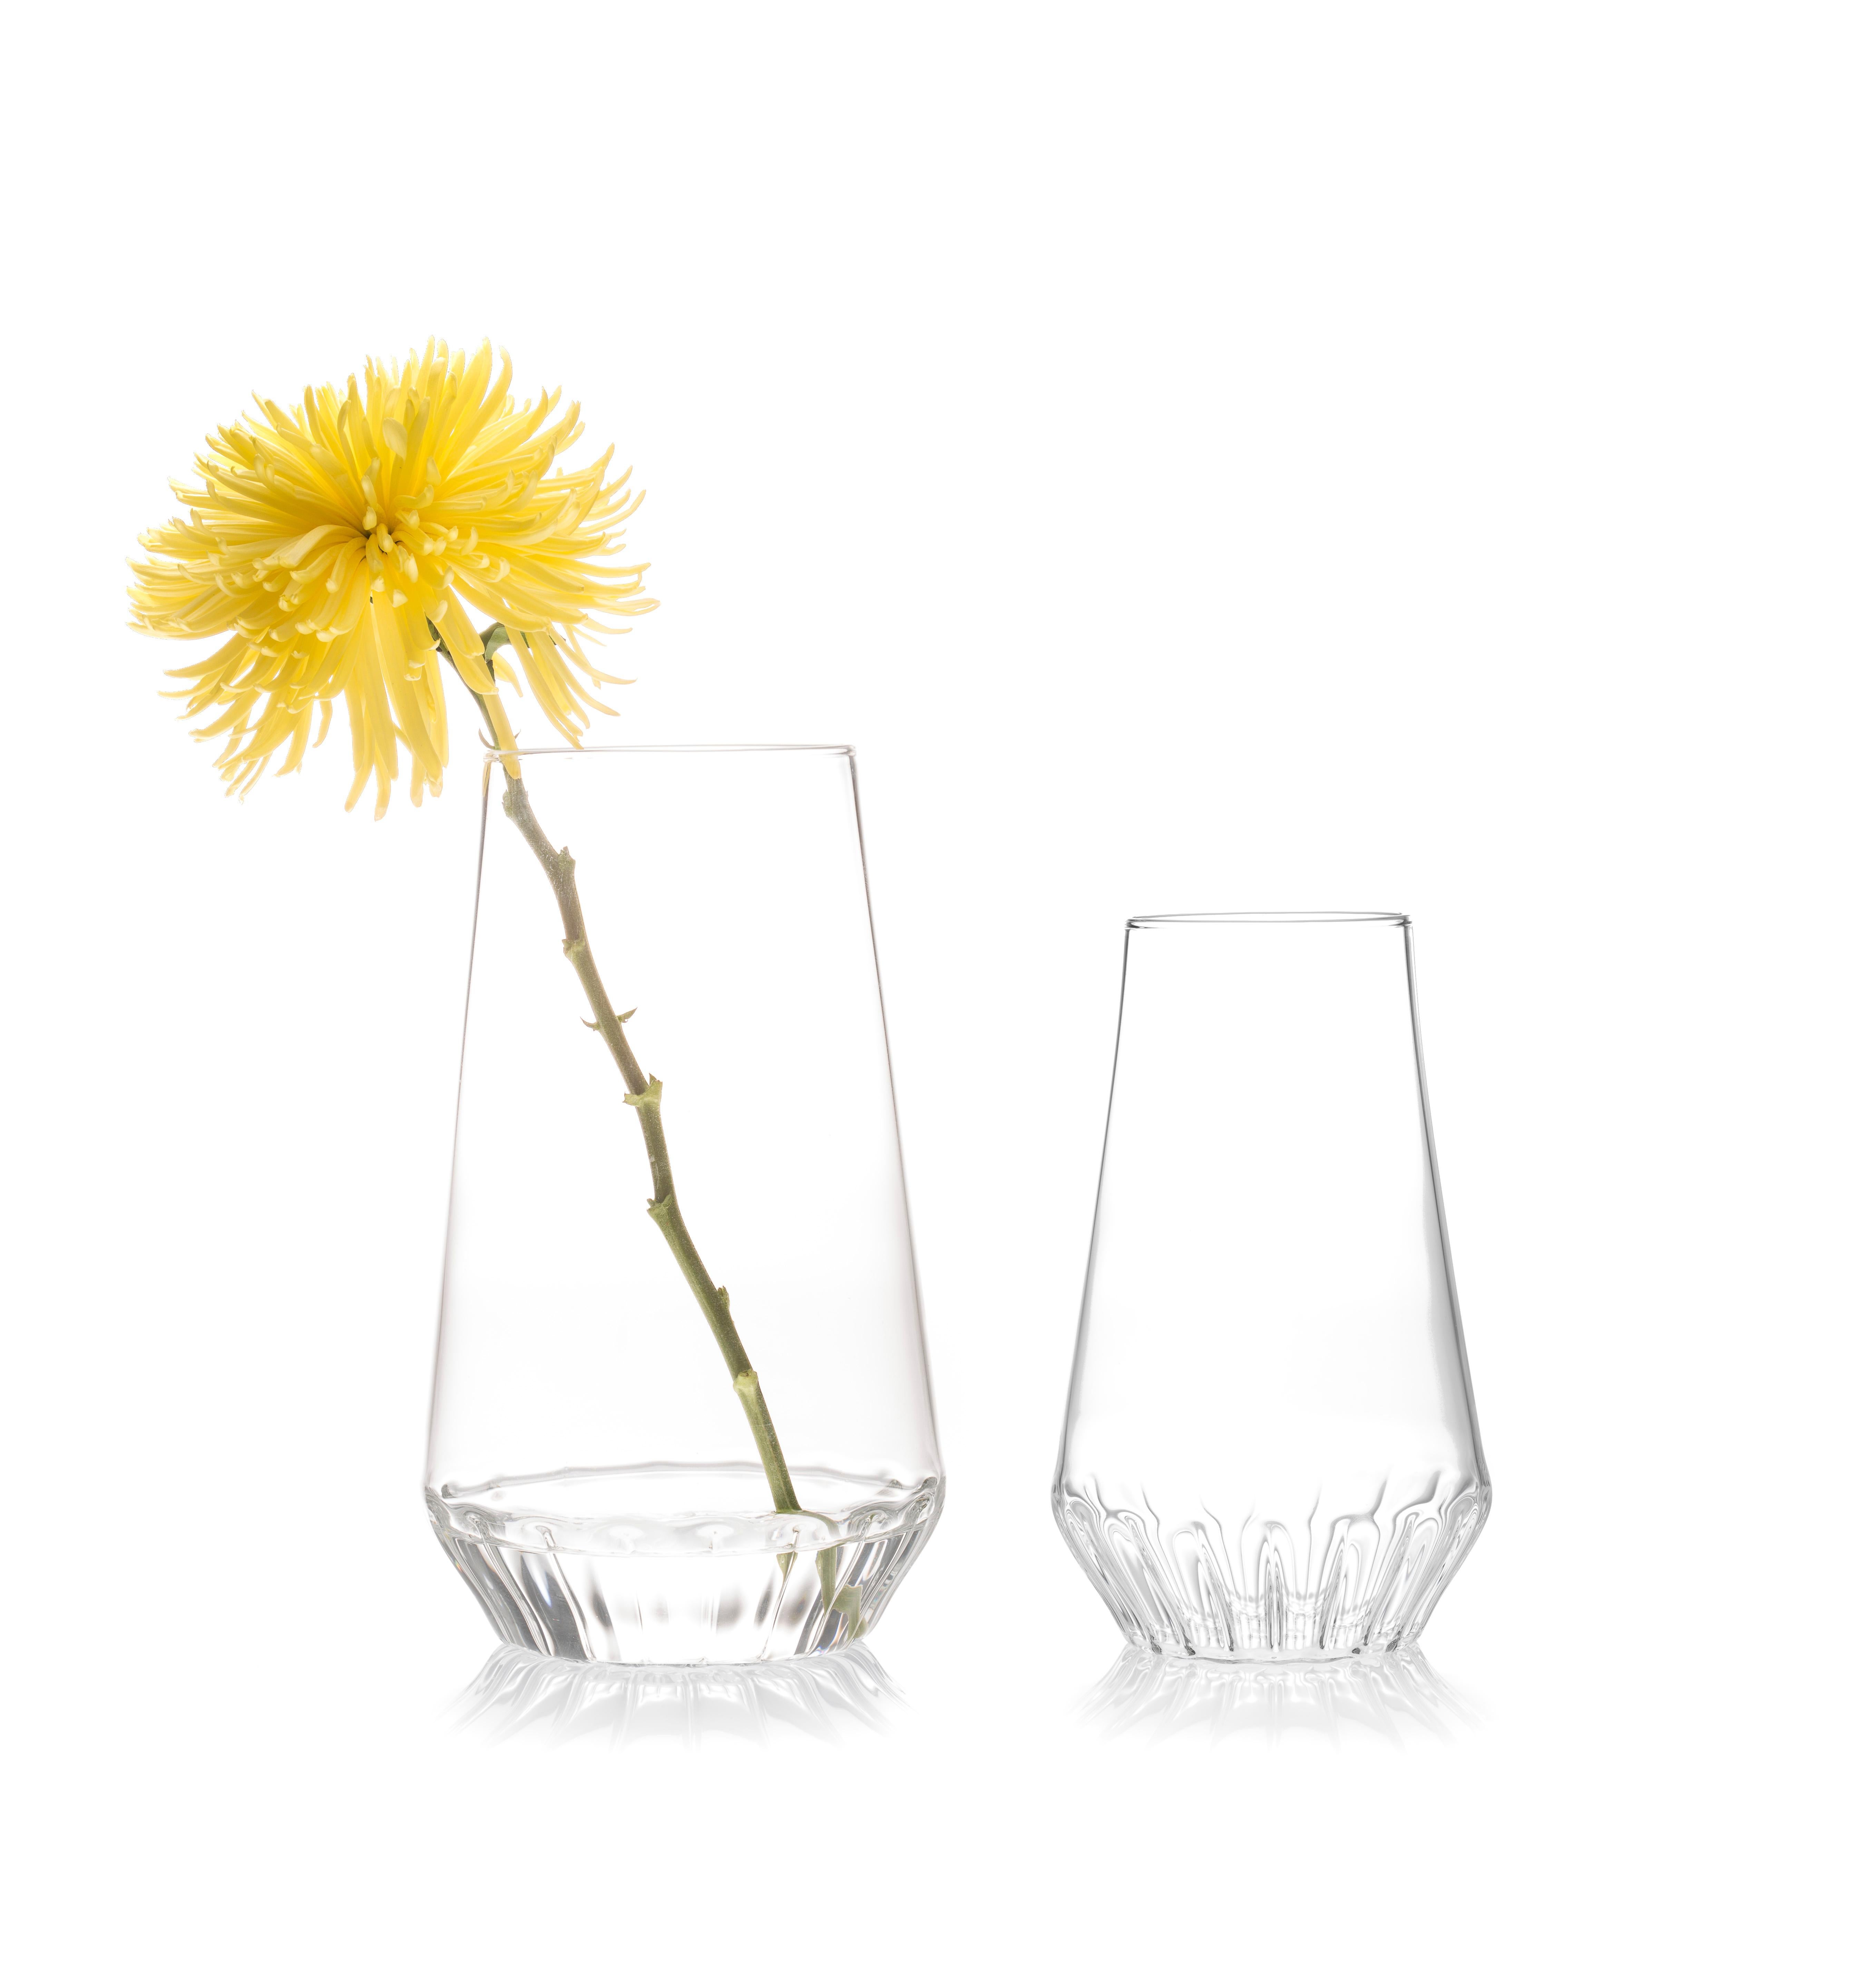 Large and medium vases - set of two.
The set of two contemporary Czech clear glass large with medium Rossi large vases, from a single stem to a beautiful bouquet, the modern and minimal Rossi vases highlight any flower arrangement they contain by